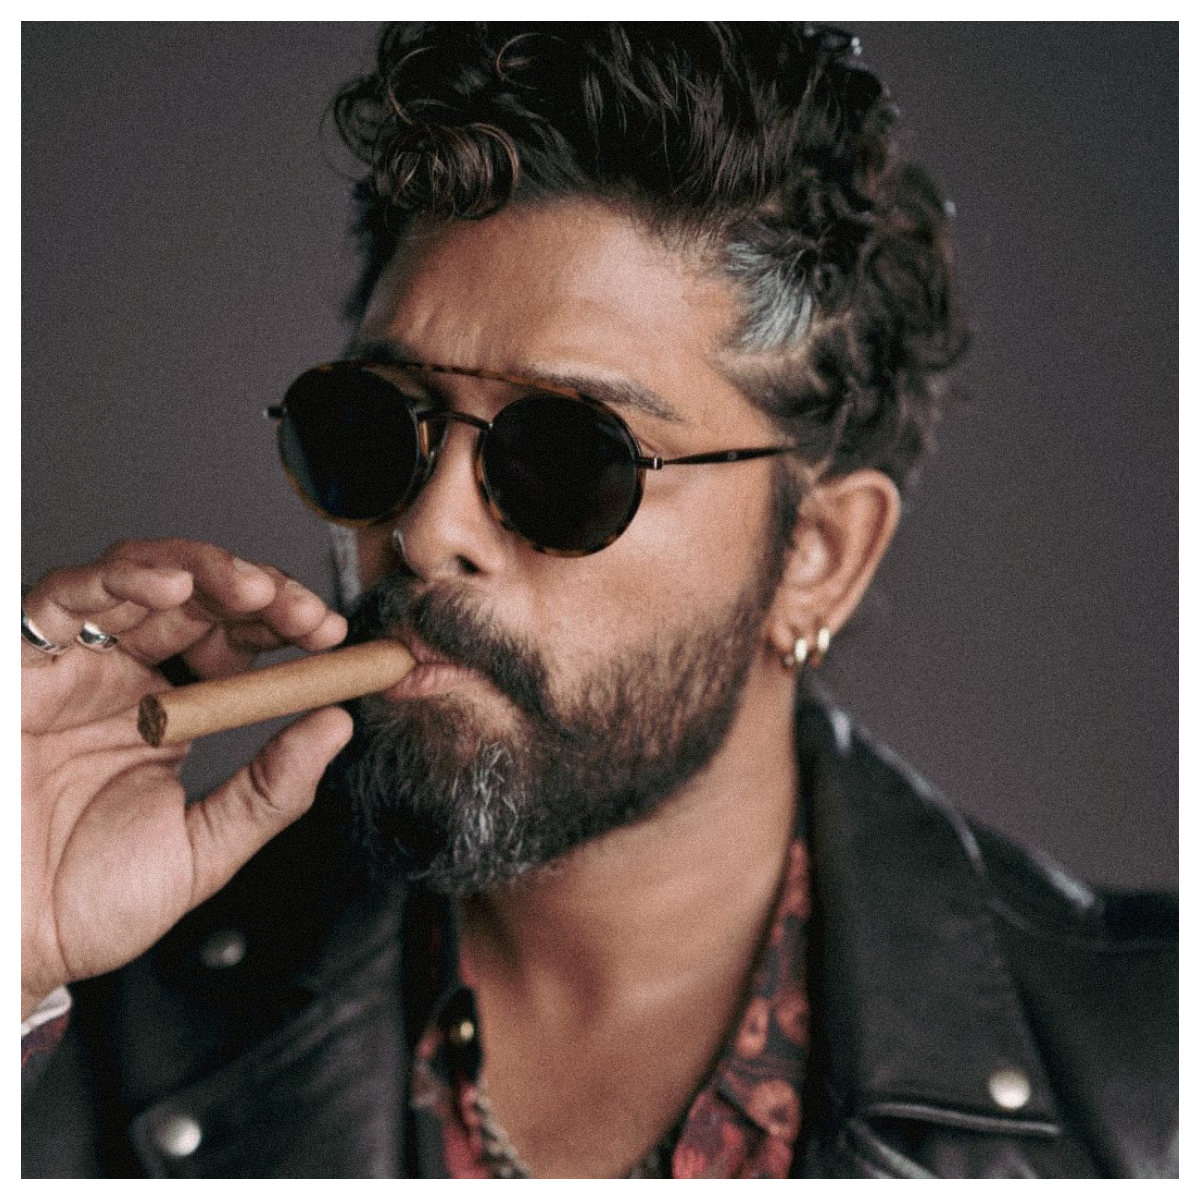 Allu Arjun takes the internet by storm with his stylish new look ...